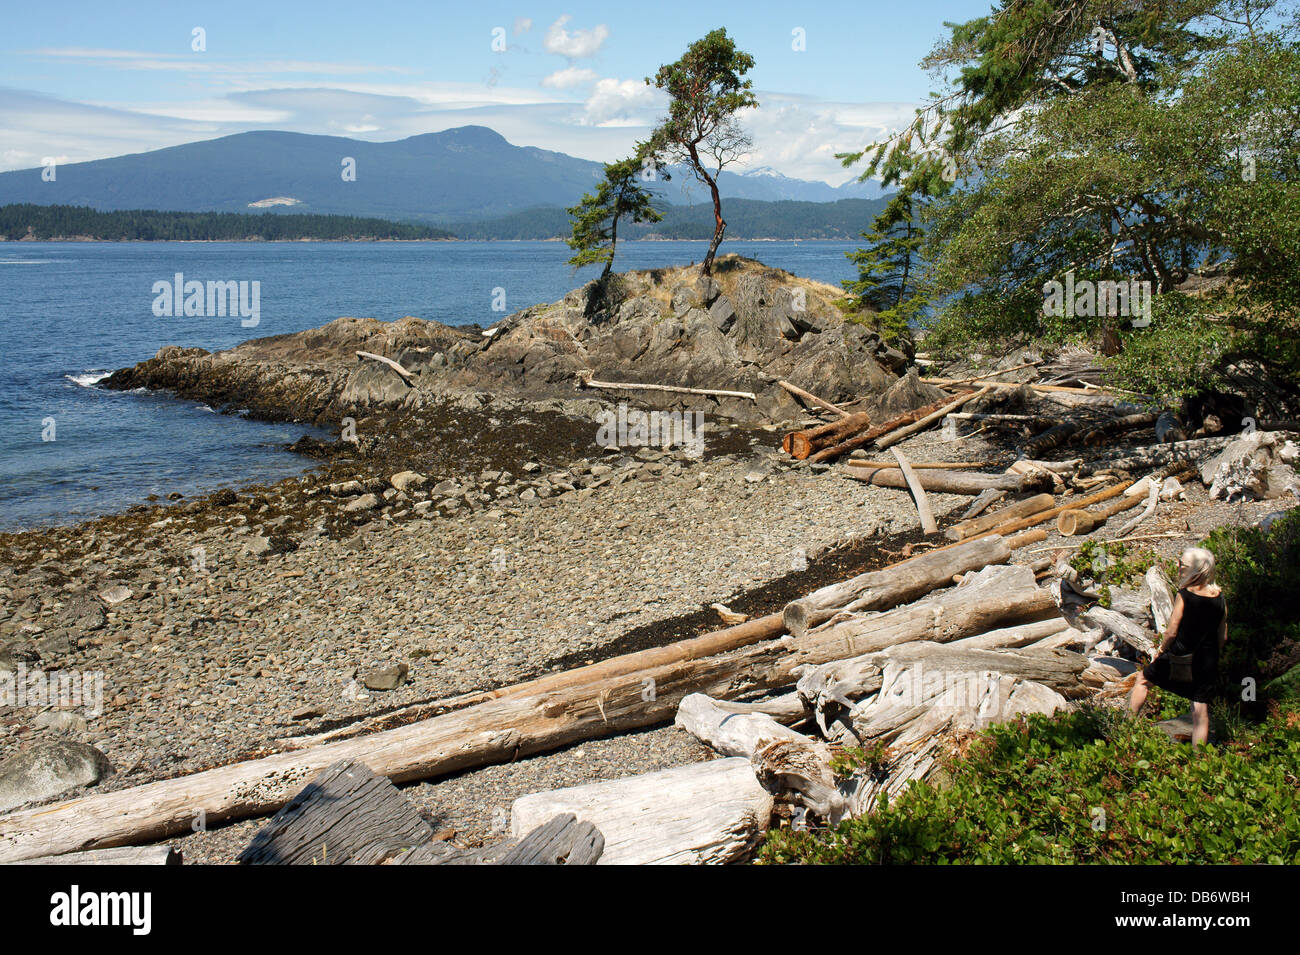 Senior woman enjoying the ocean view from a rocky beach lined with driftwood on Bowen Island, British Columbia, Canada Stock Photo